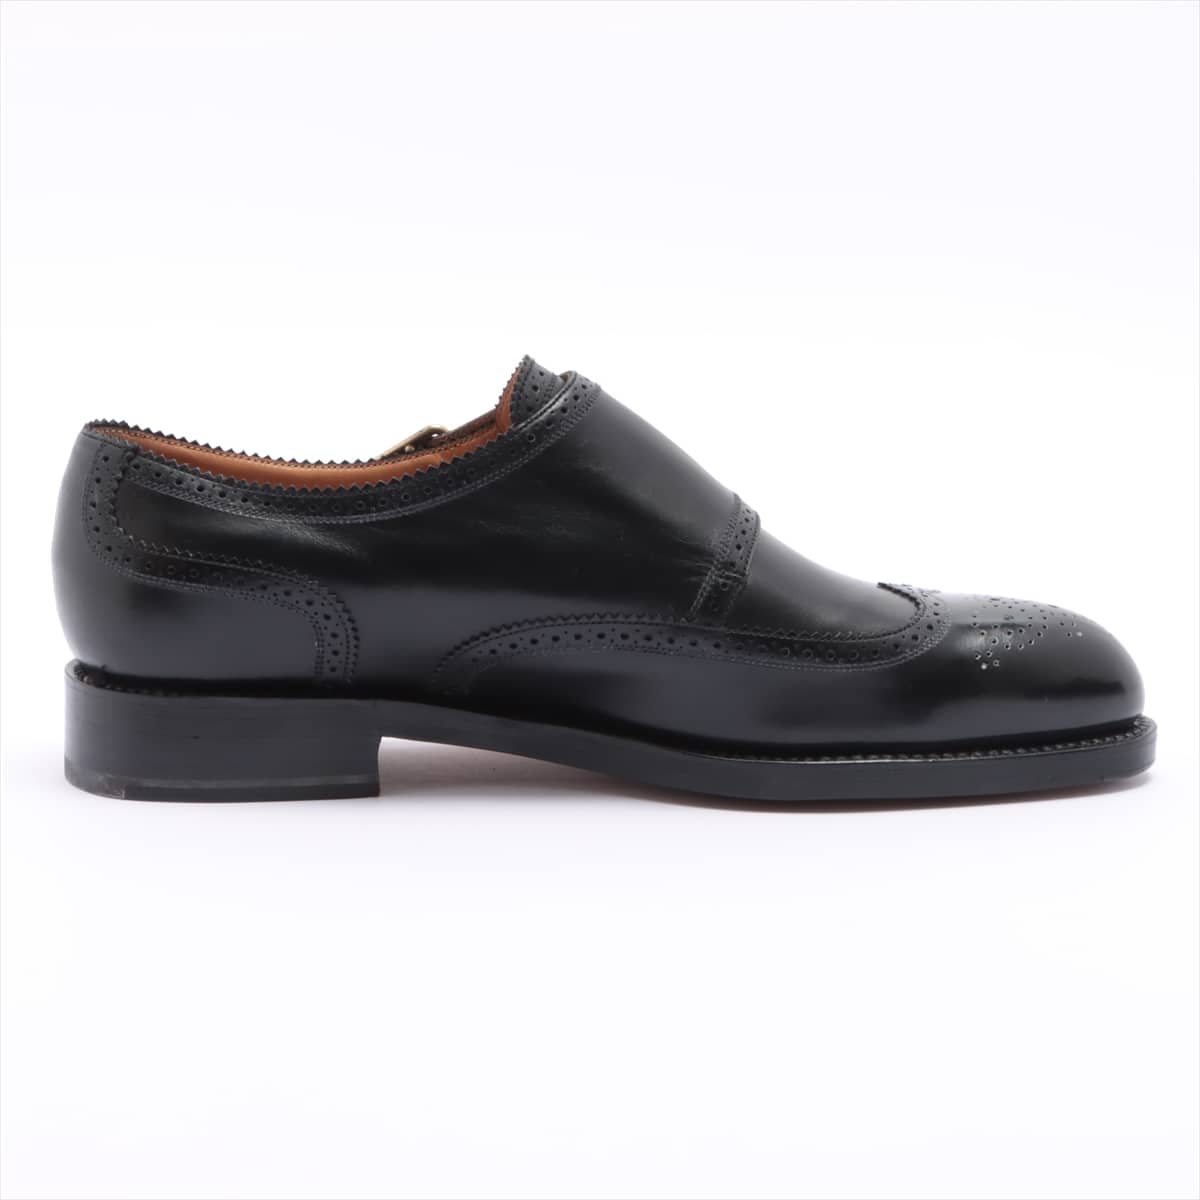 J. M. Weston Leather Shoes 8 Men's Black wingtip Double monk With genuine shoe tree There is insole repair